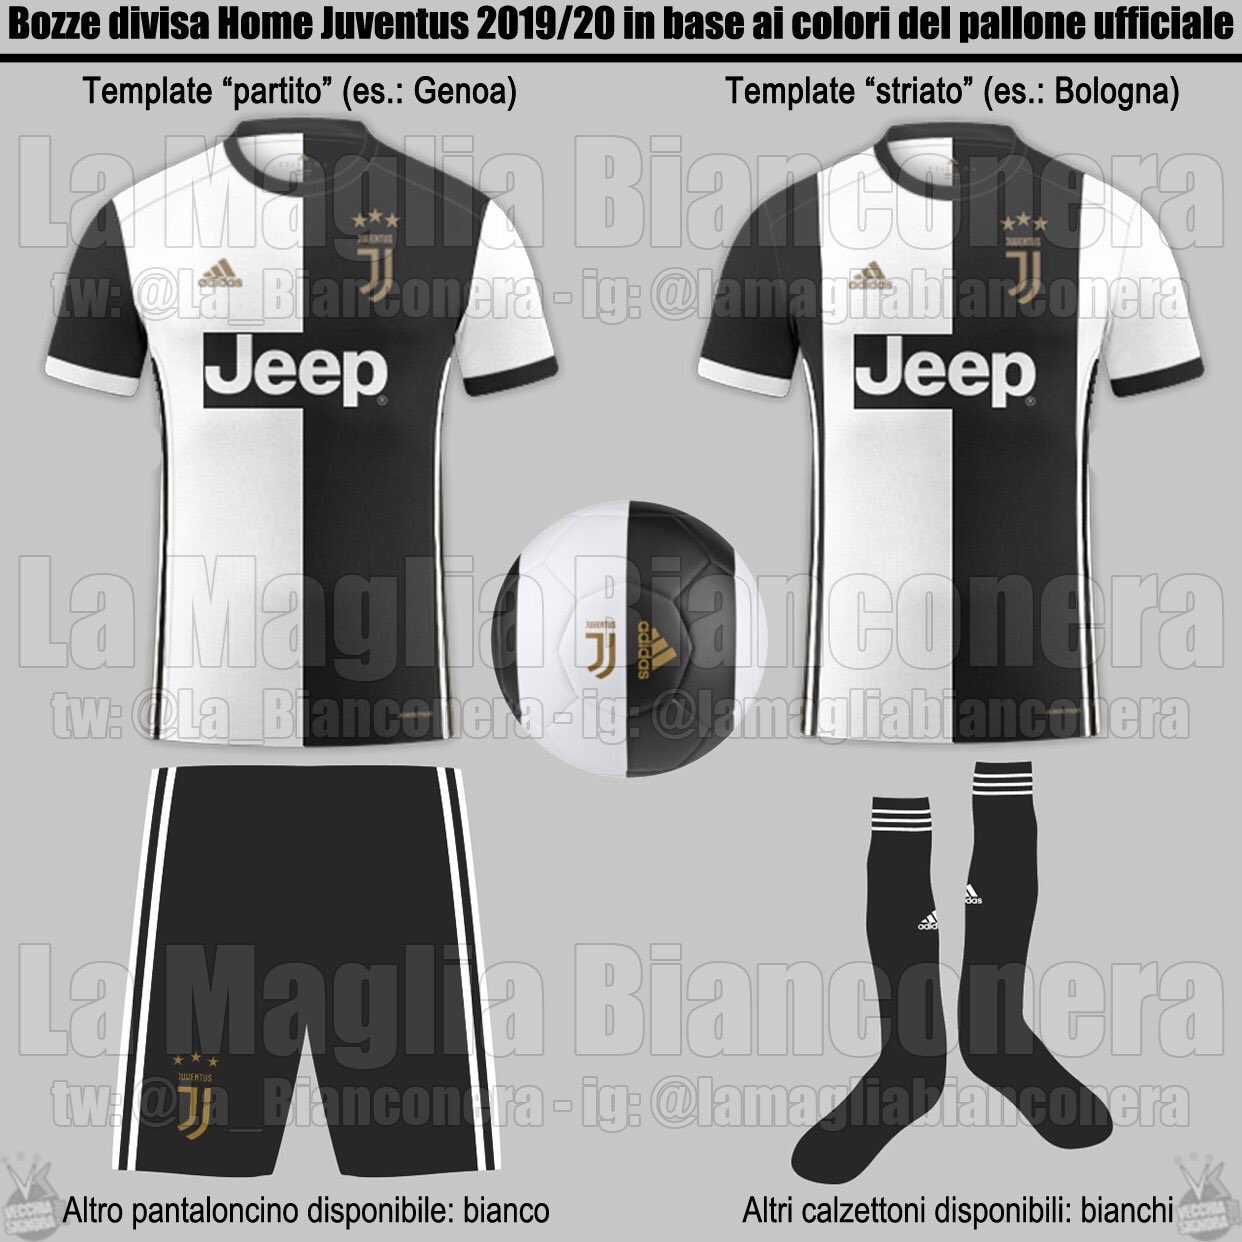 Around Turin en Twitter: "Colors are official, the design not yet but very  probable. Enjoy the Juventus kits 2019/20 by @La_Bianconera  https://t.co/yOJ0ANmrFG" / Twitter